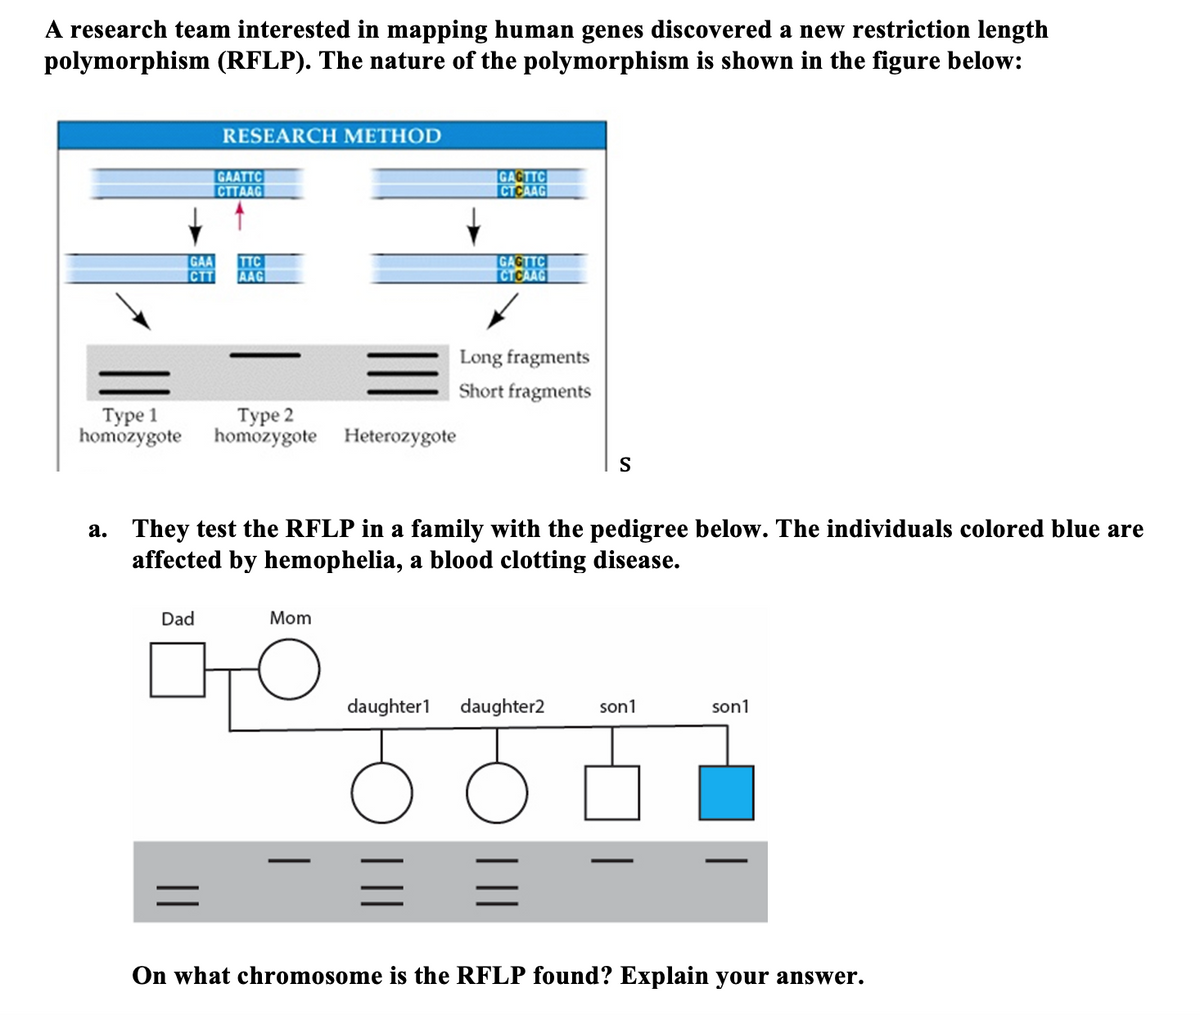 A research team interested in mapping human genes discovered a new restriction length
polymorphism (RFLP). The nature of the polymorphism is shown in the figure below:
RESEARCH METHOD
GAATTC
CTTAAG
GAGTTC
CTCAAG
GAA
TTC
CTT
AAG
GAGTTC
CTCAAG
Long fragments
Short fragments
Туре 1
homozygote
Туре 2
homozygote Heterozygote
S
a. They test the RFLP in a family with the pedigree below. The individuals colored blue are
affected by hemophelia, a blood clotting disease.
Dad
Mom
daughter1
daughter2
son1
son1
On what chromosome is the RFLP found? Explain your answer.
